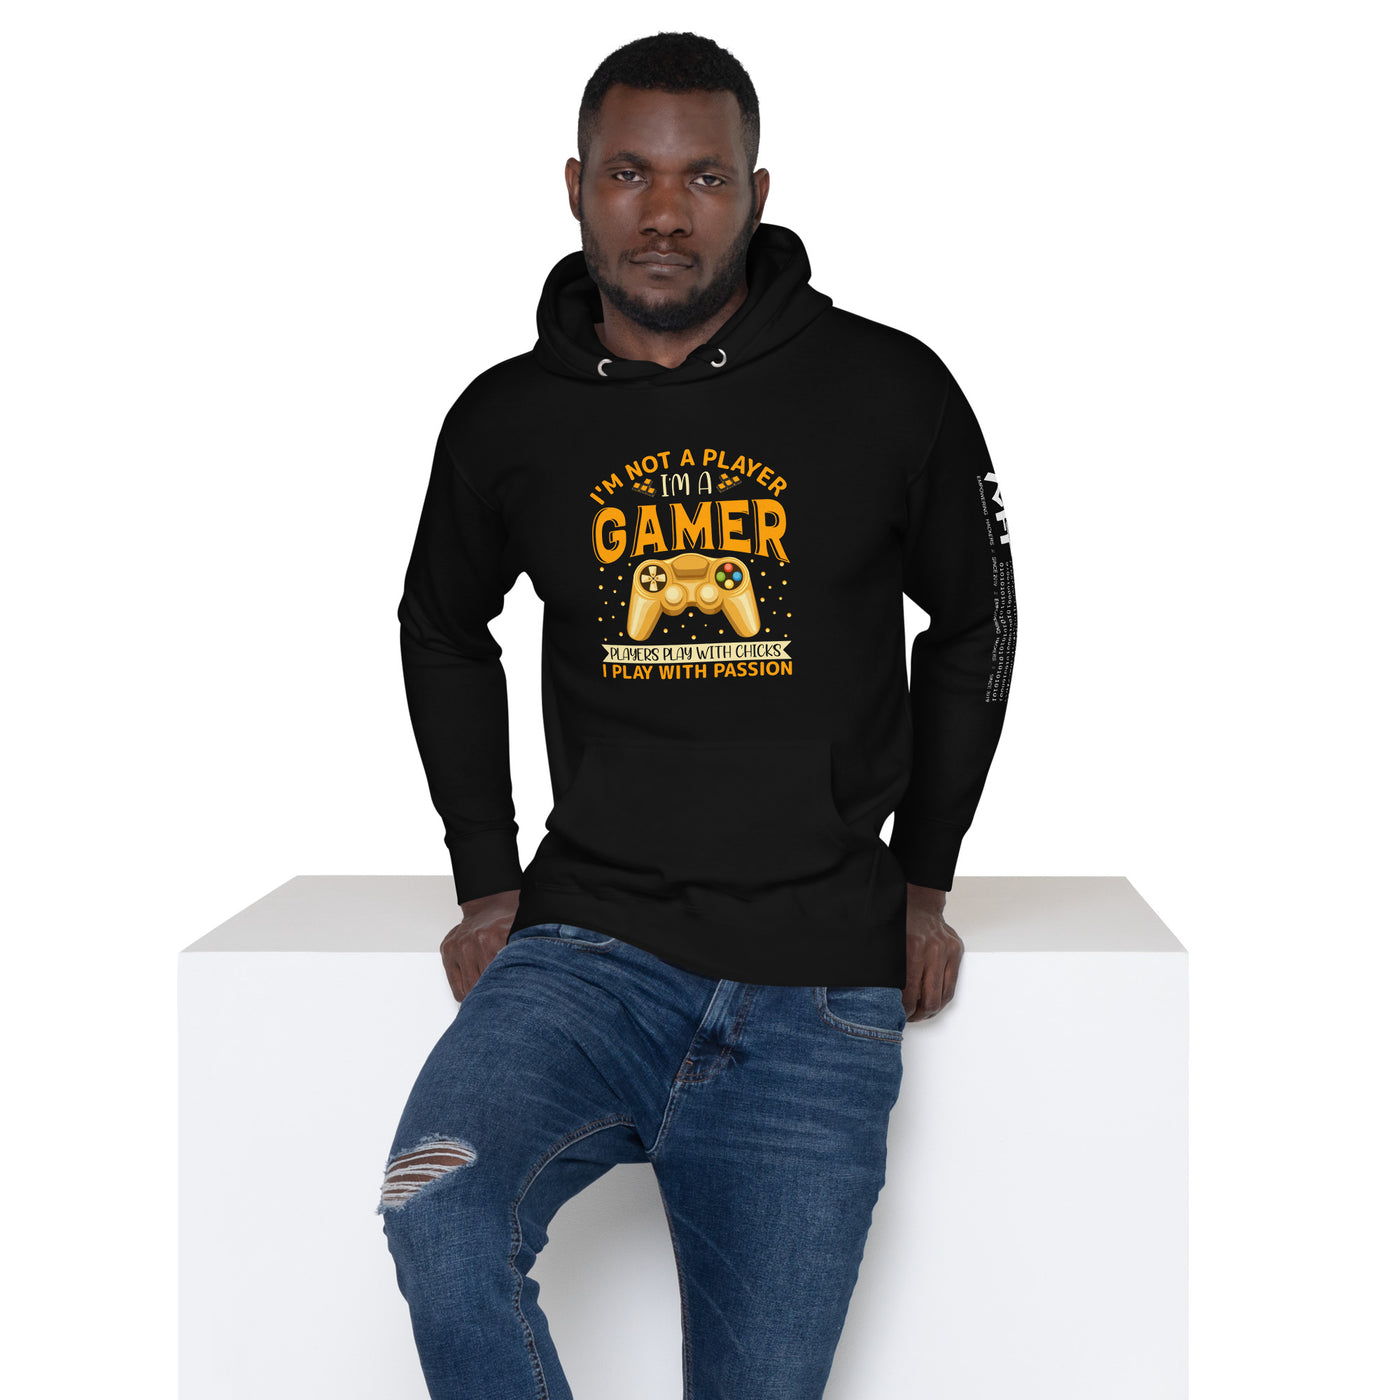 I am not a Player, I am a Gamer; Player plays with Chicks, I play with Passion - Unisex Hoodie